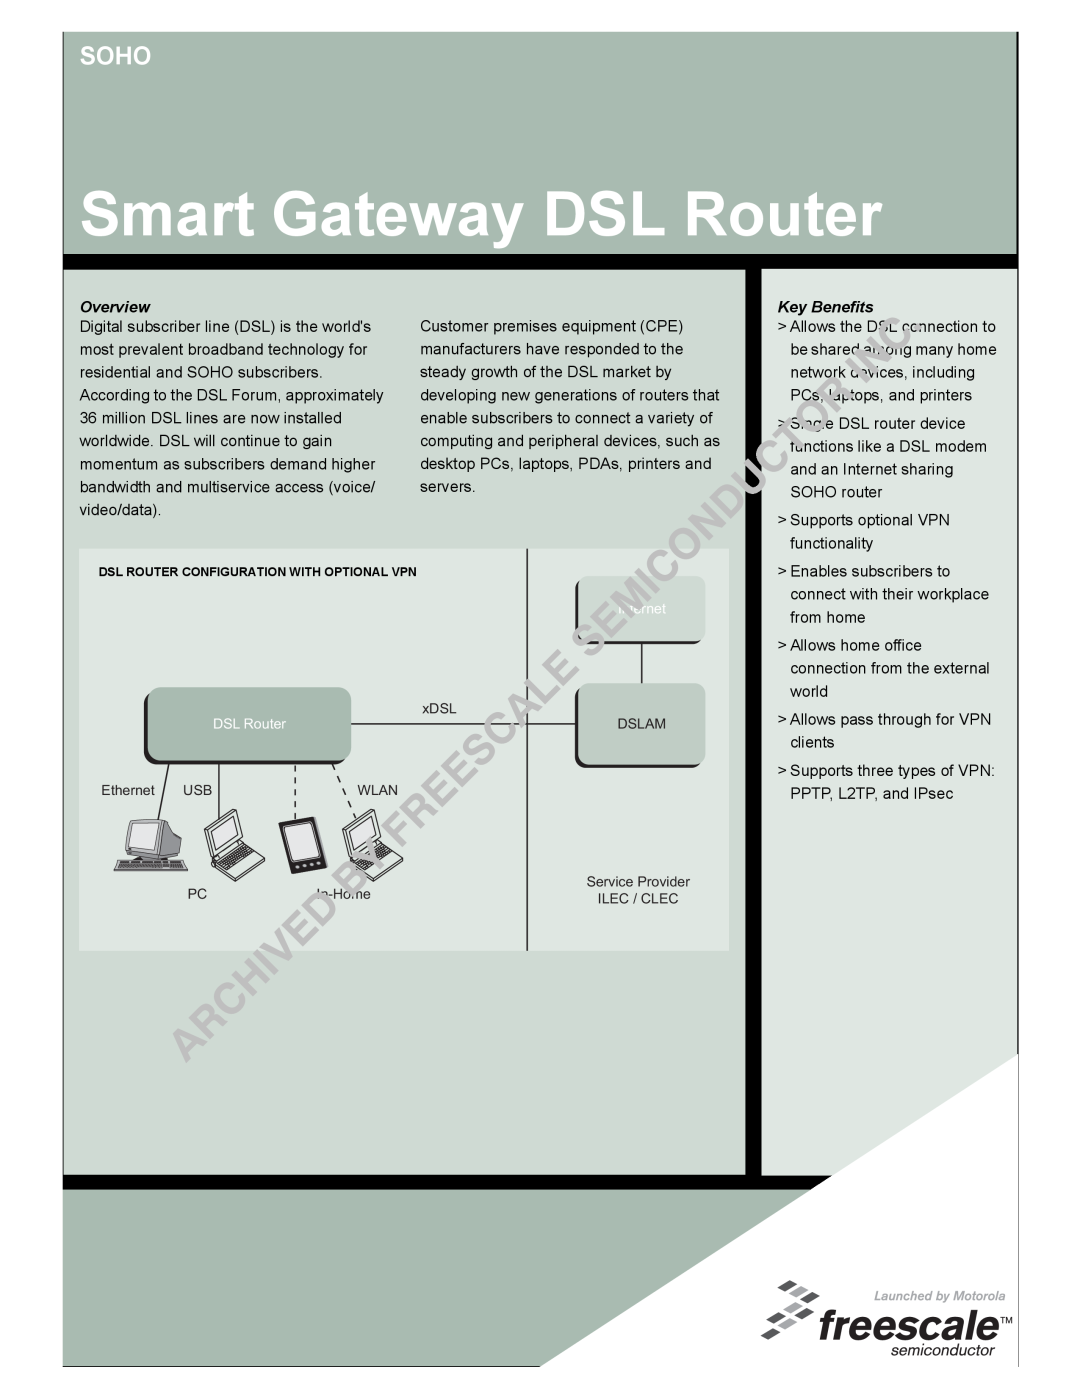 Freescale Semiconductor SG2106-2 manual Smart Gateway DSL Router, Soho, Overview, Key Benefits 